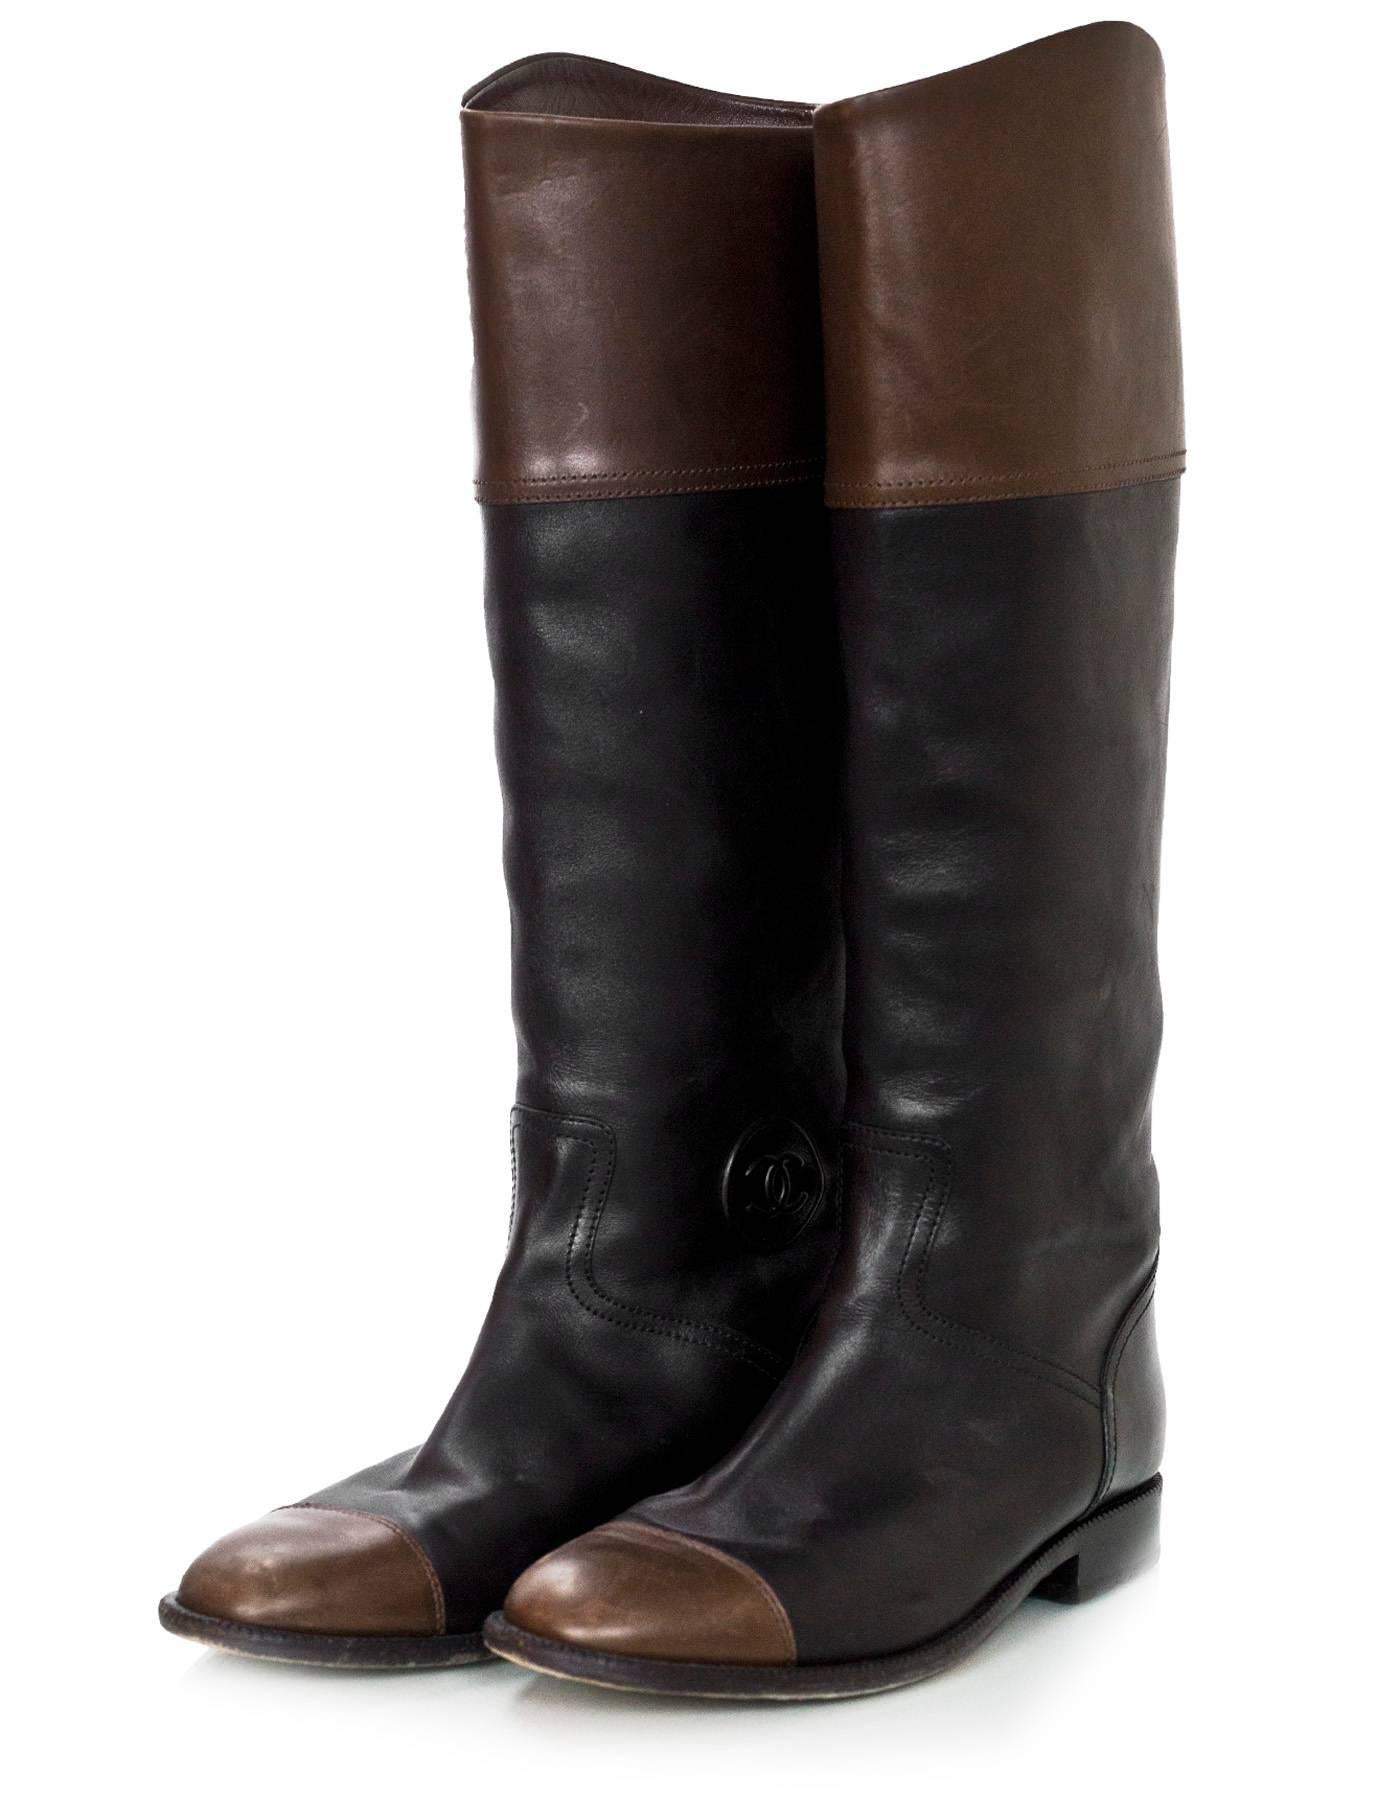 Chanel Black & Brown Leather Cap-Toe Riding Boots Sz 41

Made In: Italy
Color: Black, brown
Materials: Leather
Closure/Opening: Pull-up
Sole Stamp: CC Made in Italy 41
Overall Condition: Excellent pre-owned condition with the exception of some